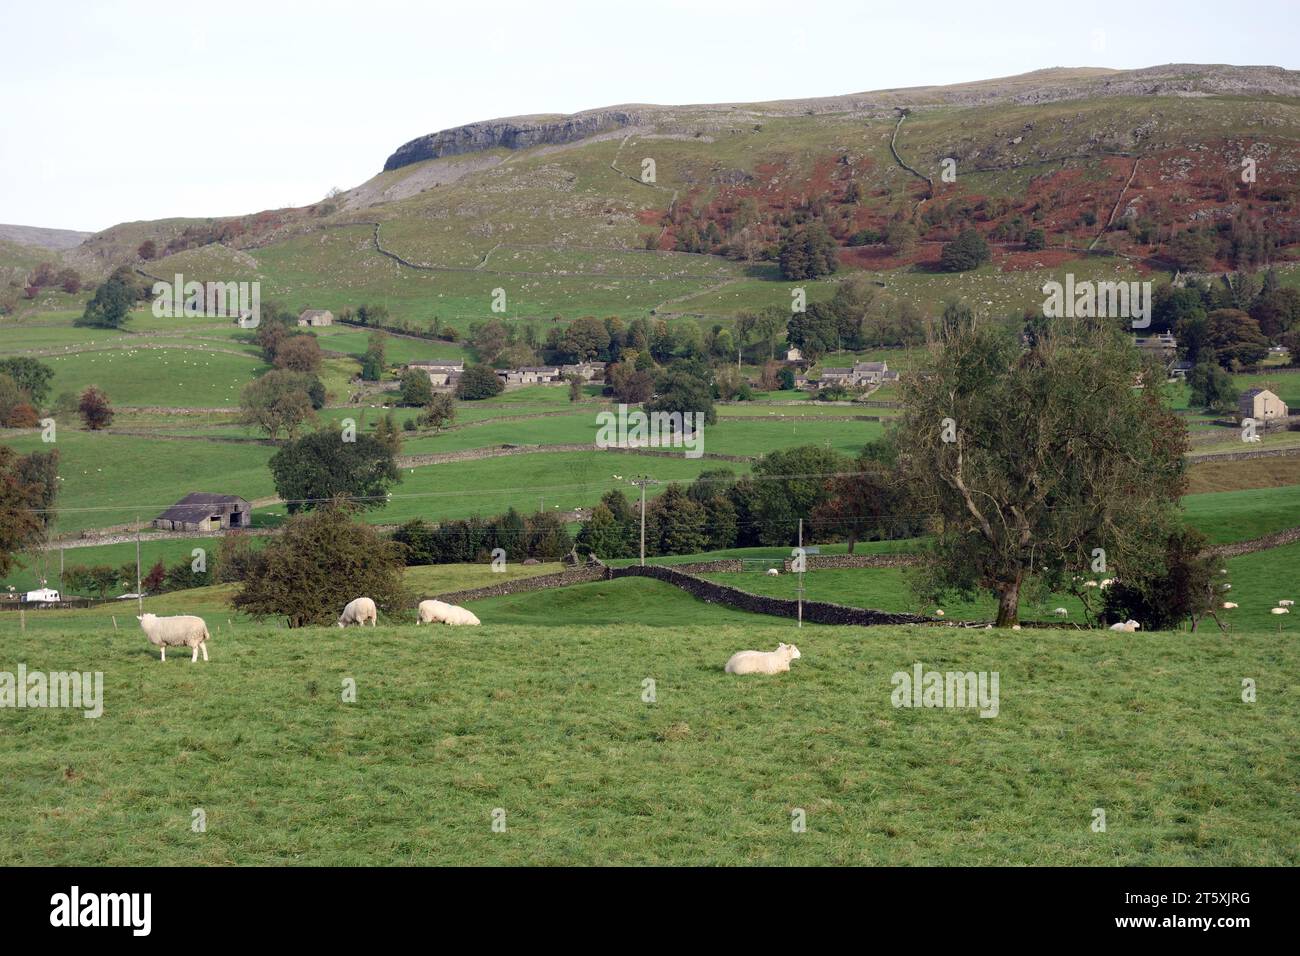 The Farming Hamlet of Wharfe Below Moughton Scar from the Footpath Below Oxenber Wood in the Yorkshire Dales National Park, England, UK. Stock Photo